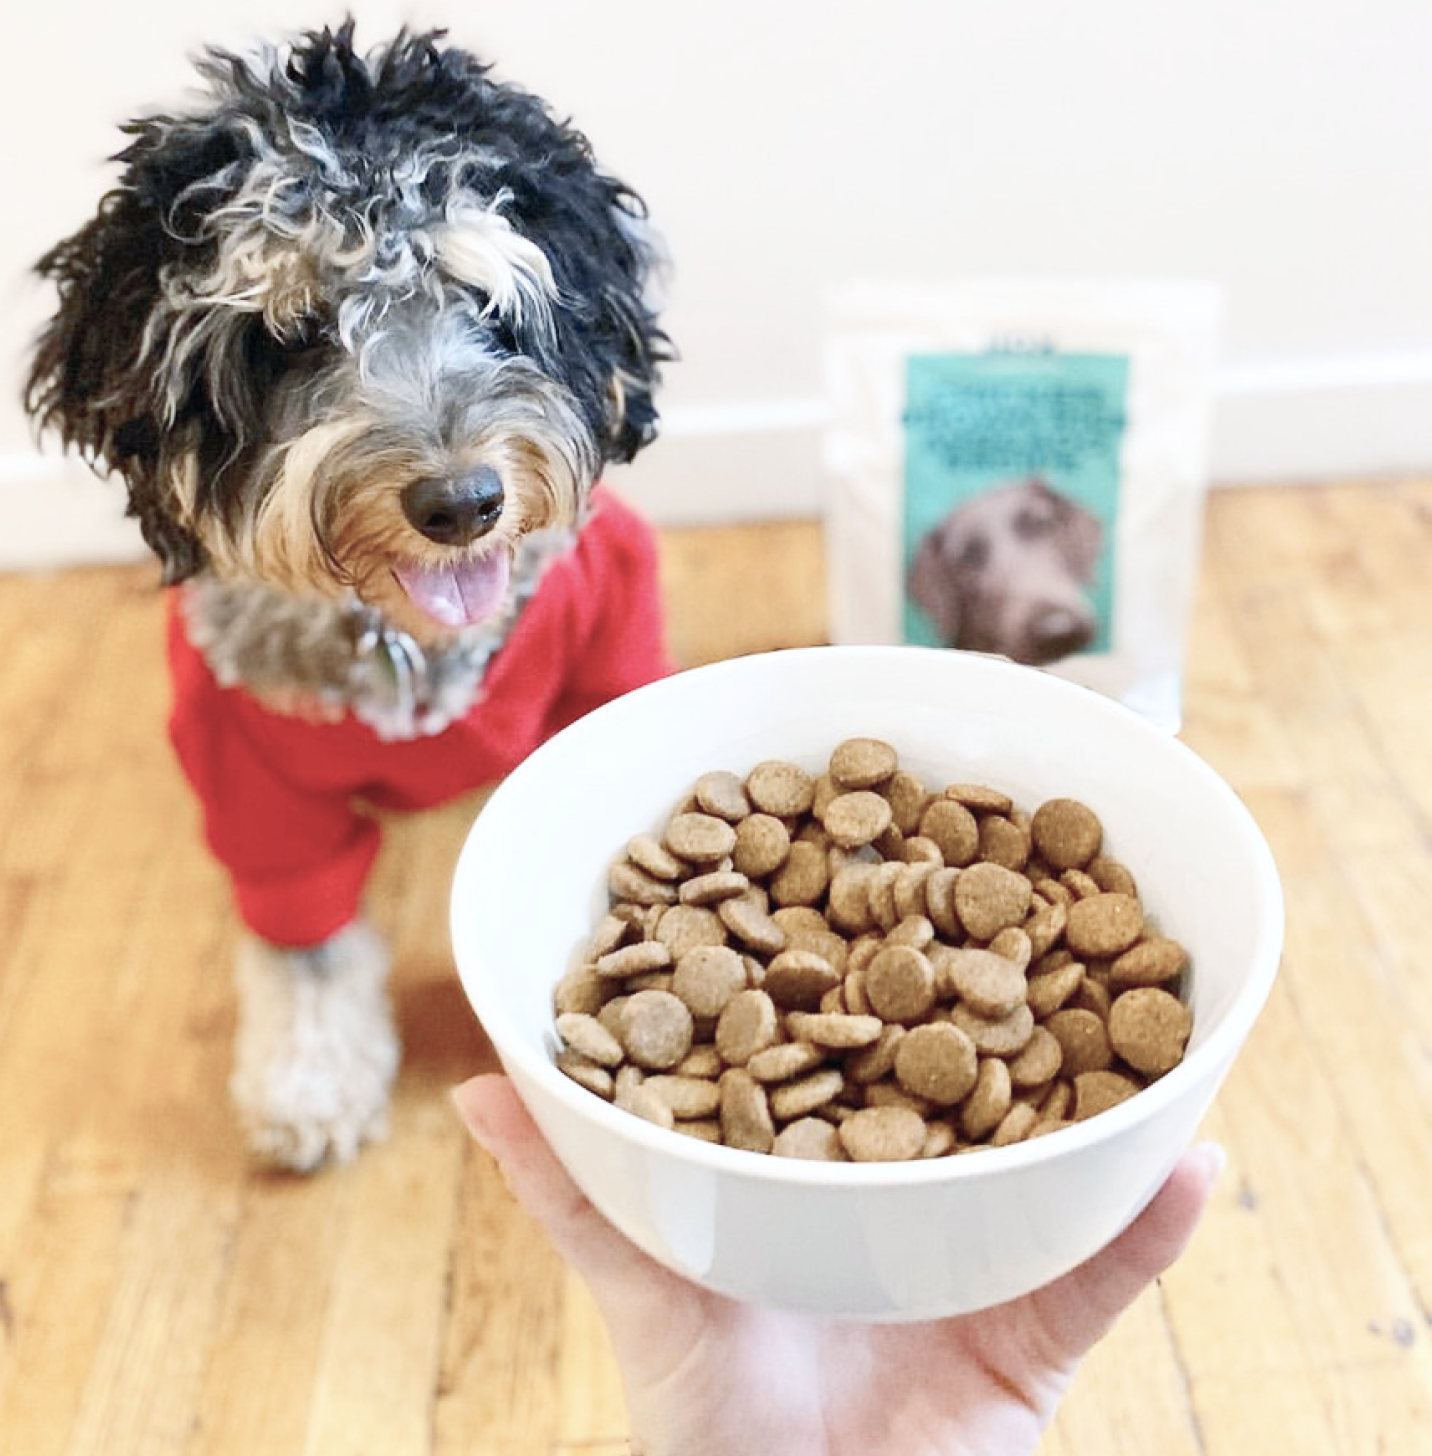 A small dog with its tongue out looking at a bowl full of Jinx dog kibble and a kibble bag next to it